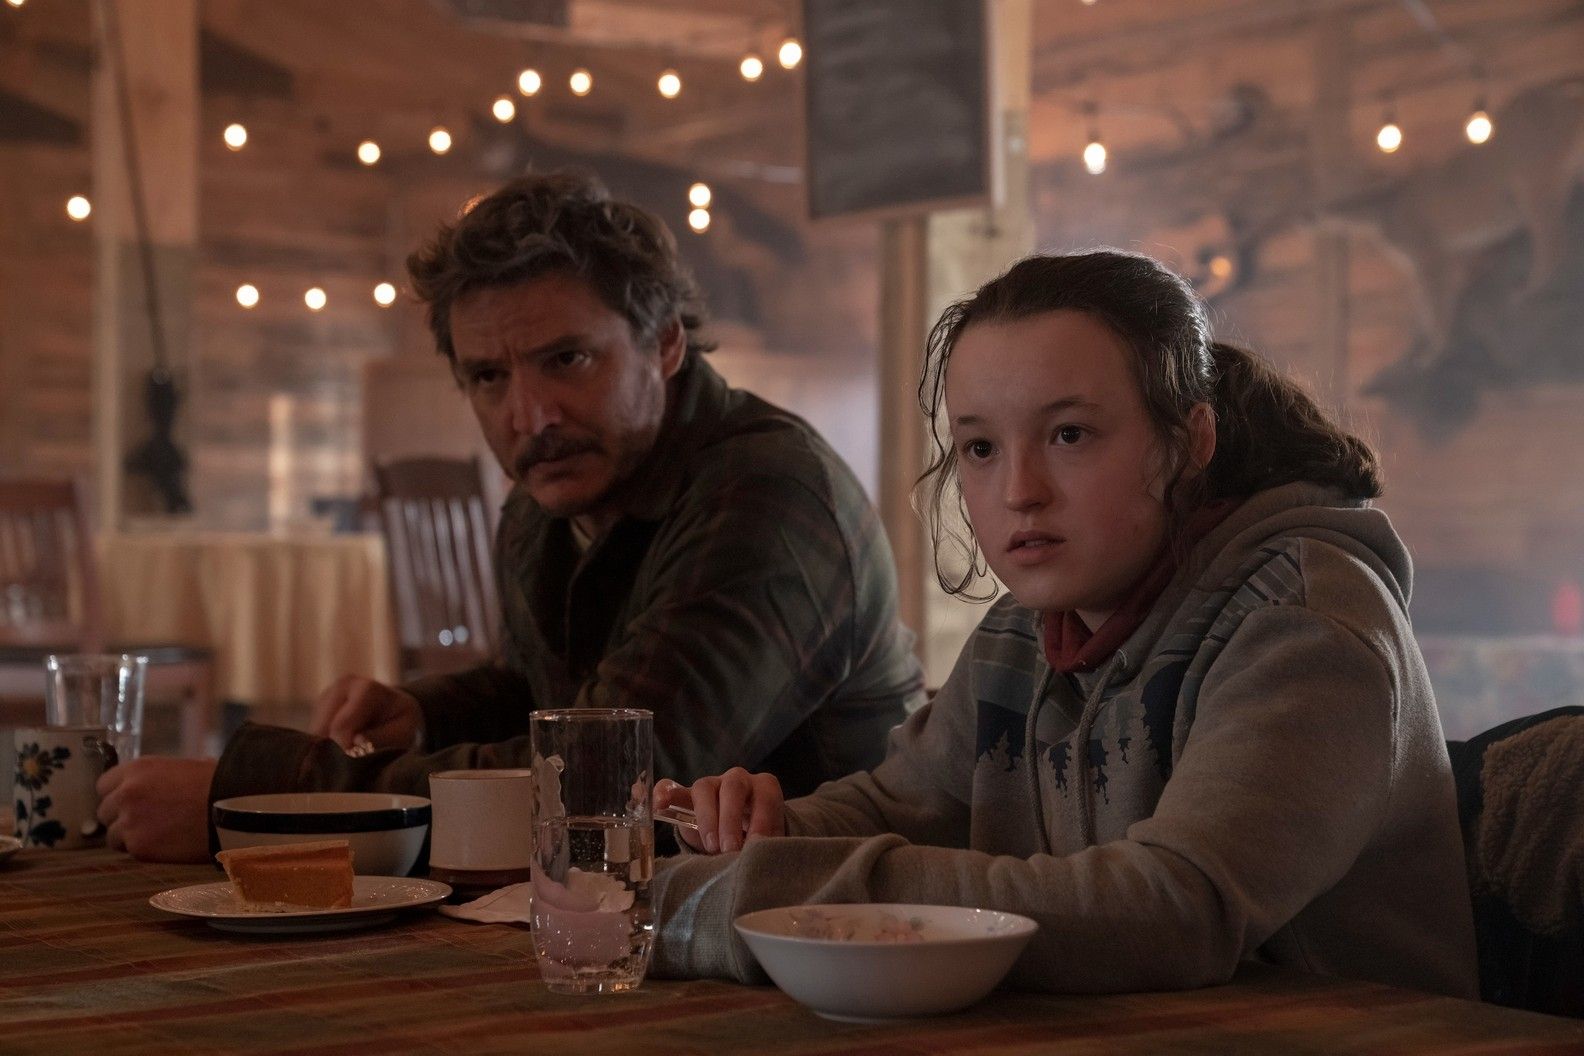 Pedro Pascal and Bella Ramsey as Joel and Ellie in The Last of Us episode 6